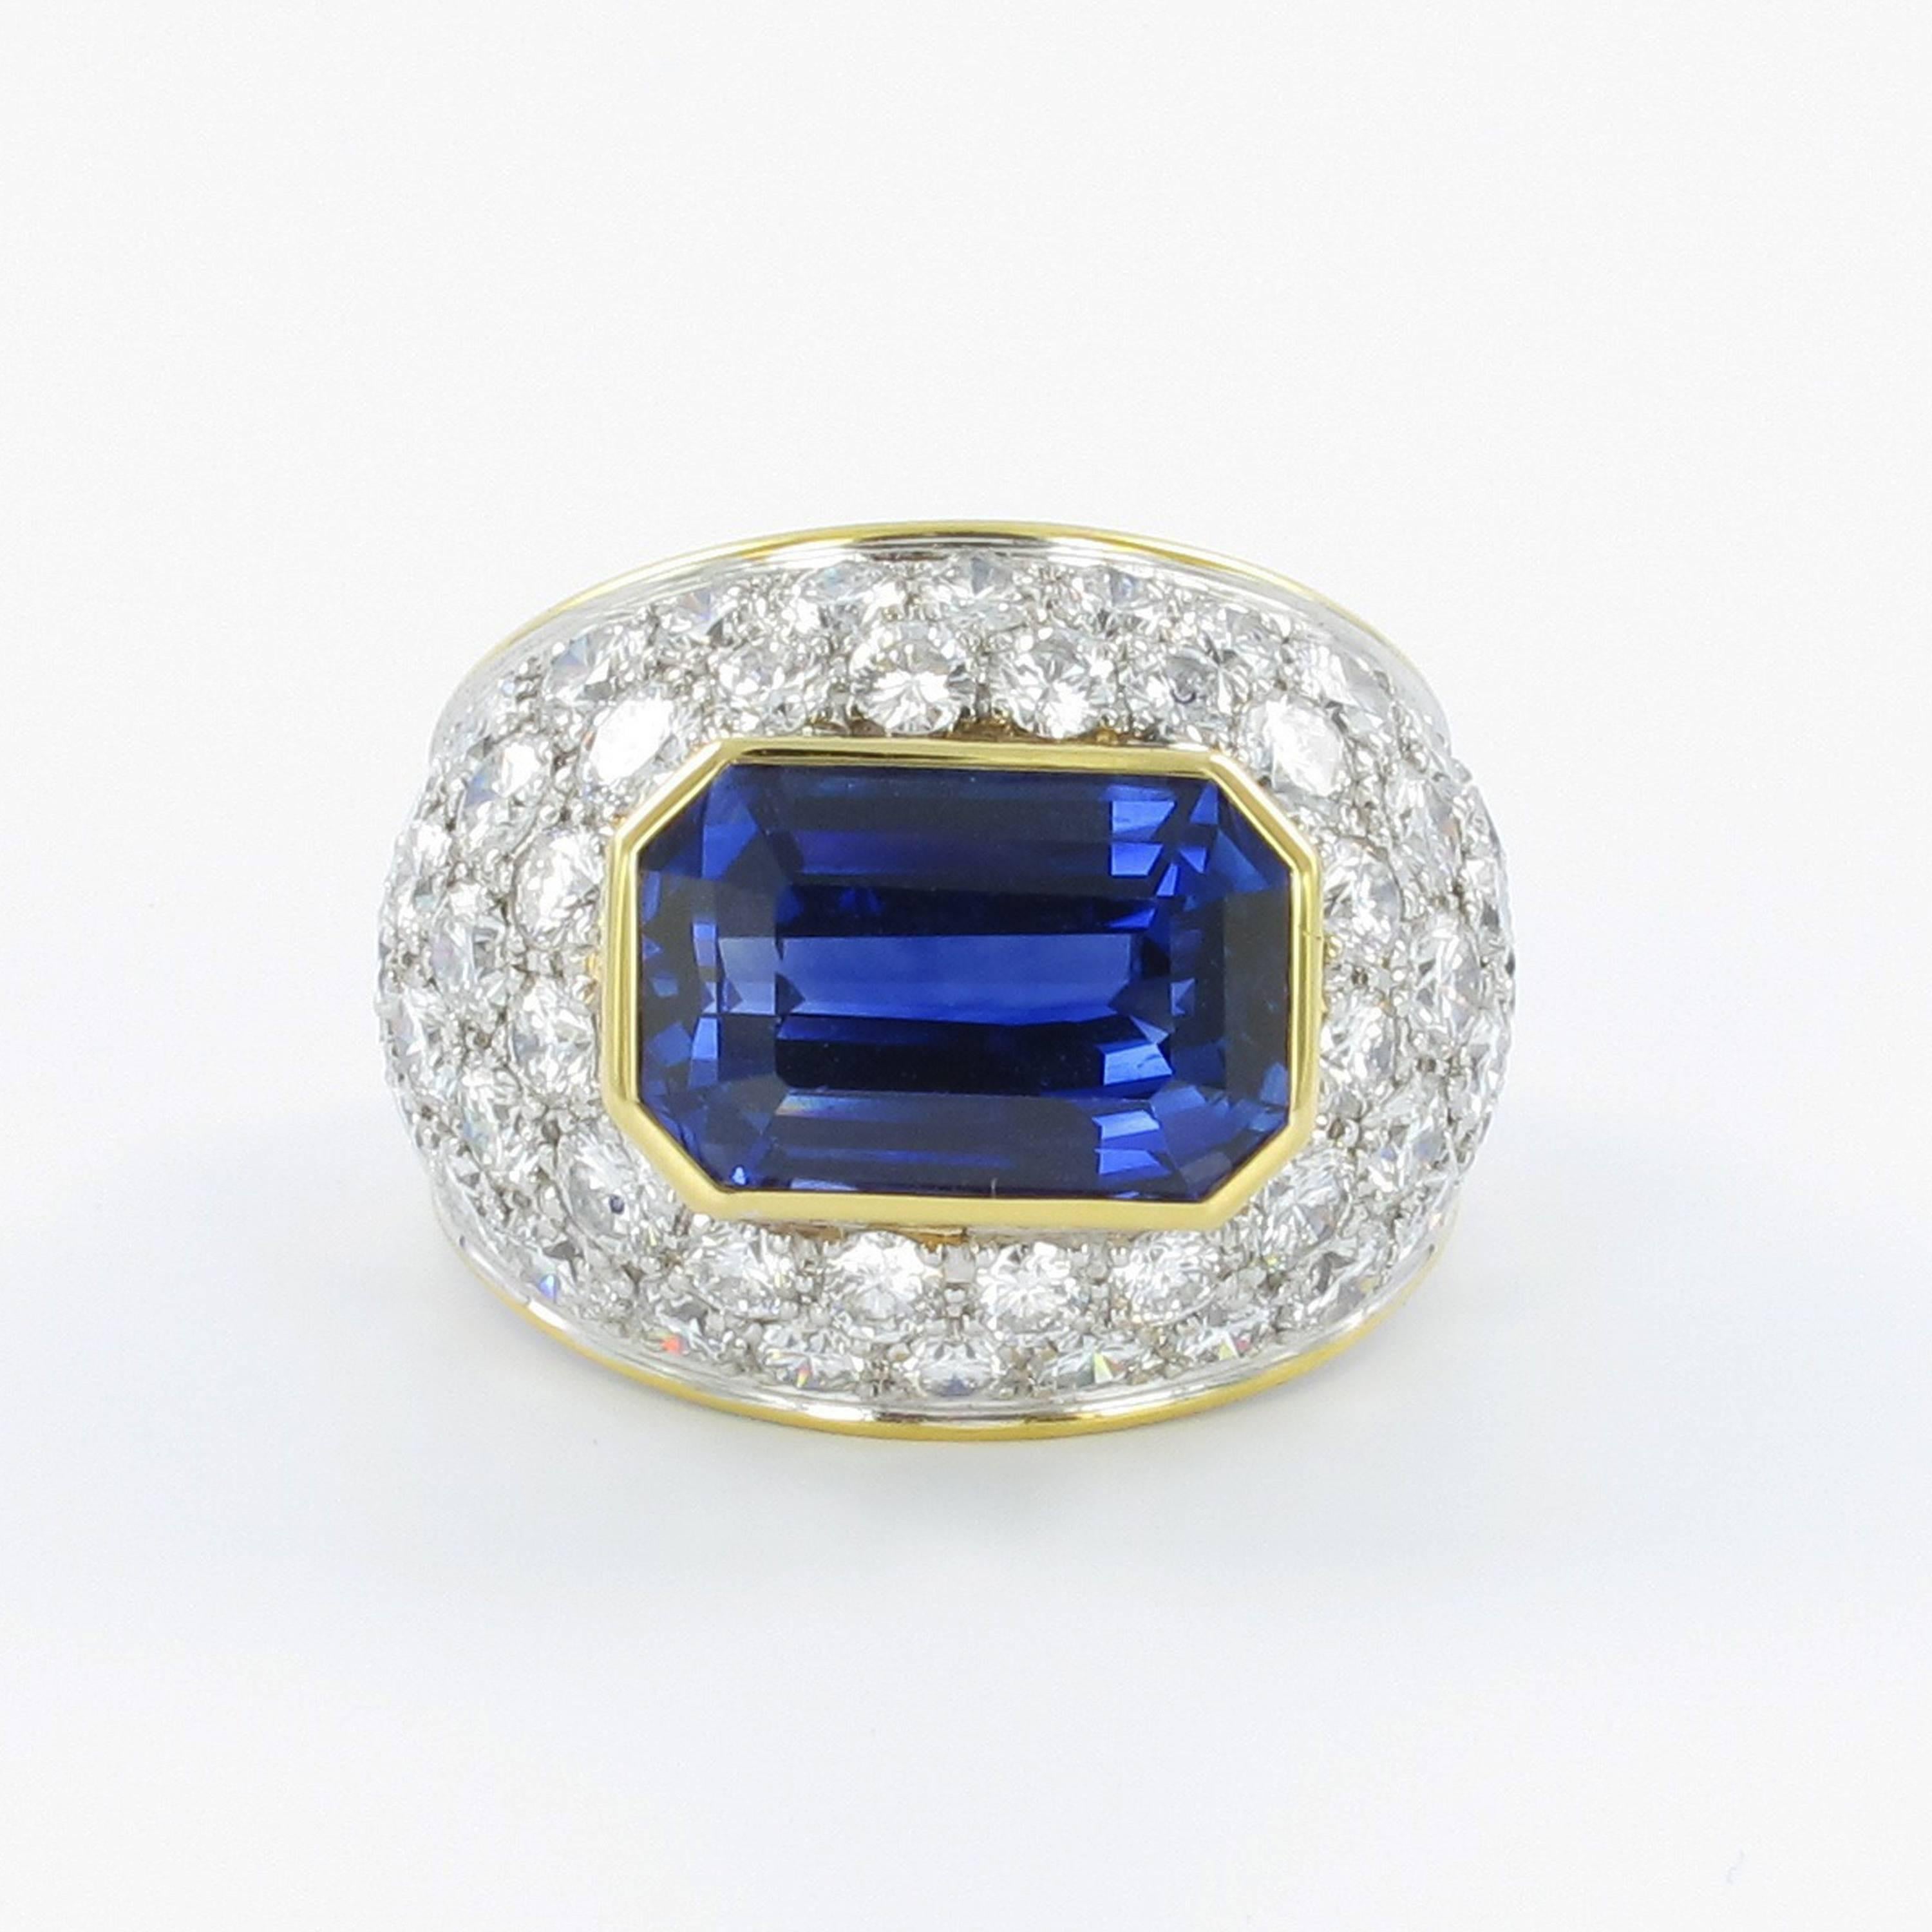 This gorgeous ring is set with an impressive emerald cut sapphire of approx. 10.30 ct surrounded by 50 brilliant cut diamonds totaling approx. 4 ct of G/H-vs quality. The sapphire of an intense blue colour seems to be heated.

Ring size: 55 EU / 7